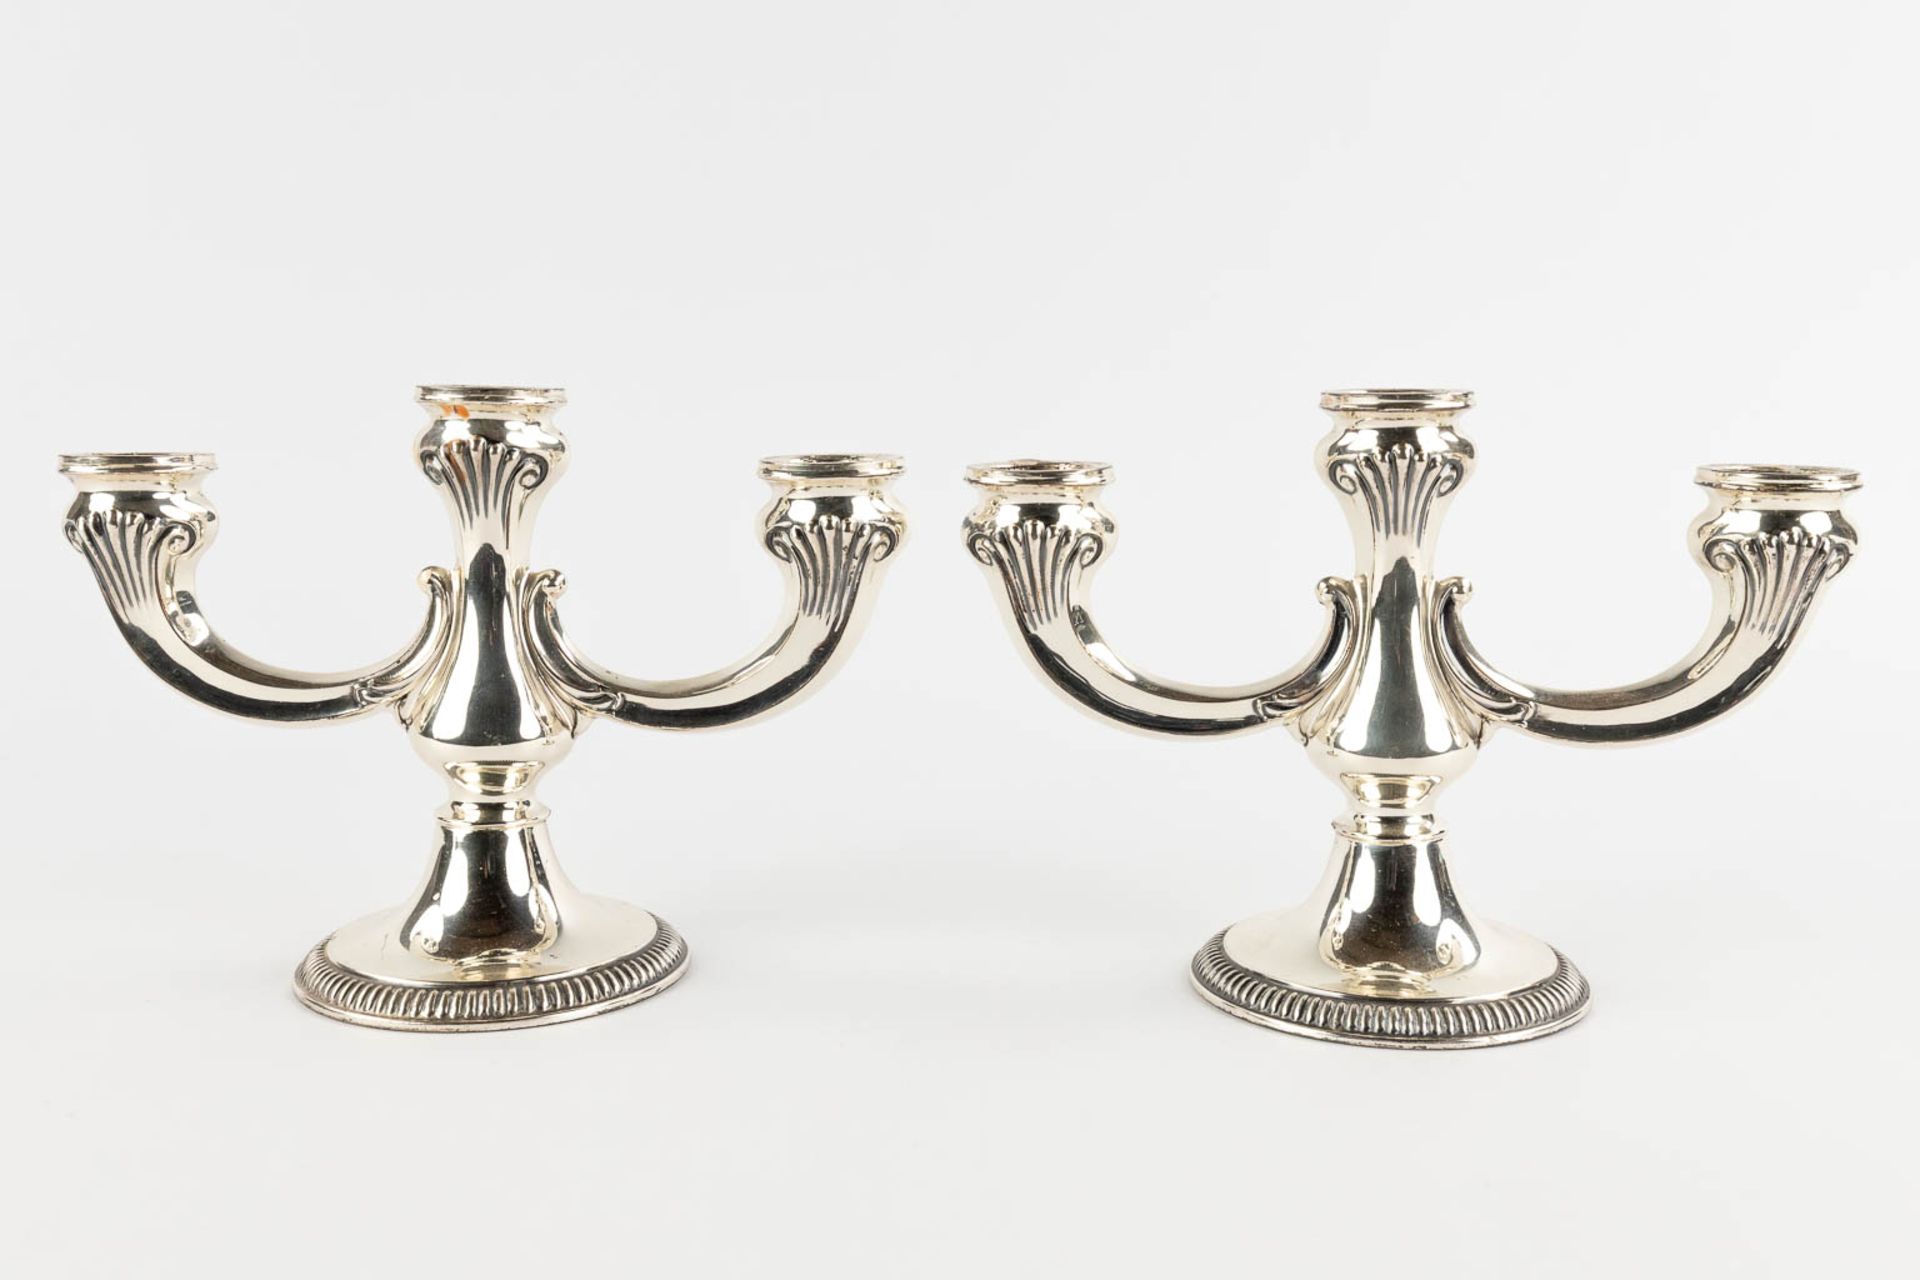 A pair of candelabra, silver. A835. gross: 589g (D:9 x W:20 x H:14 cm) - Image 5 of 10